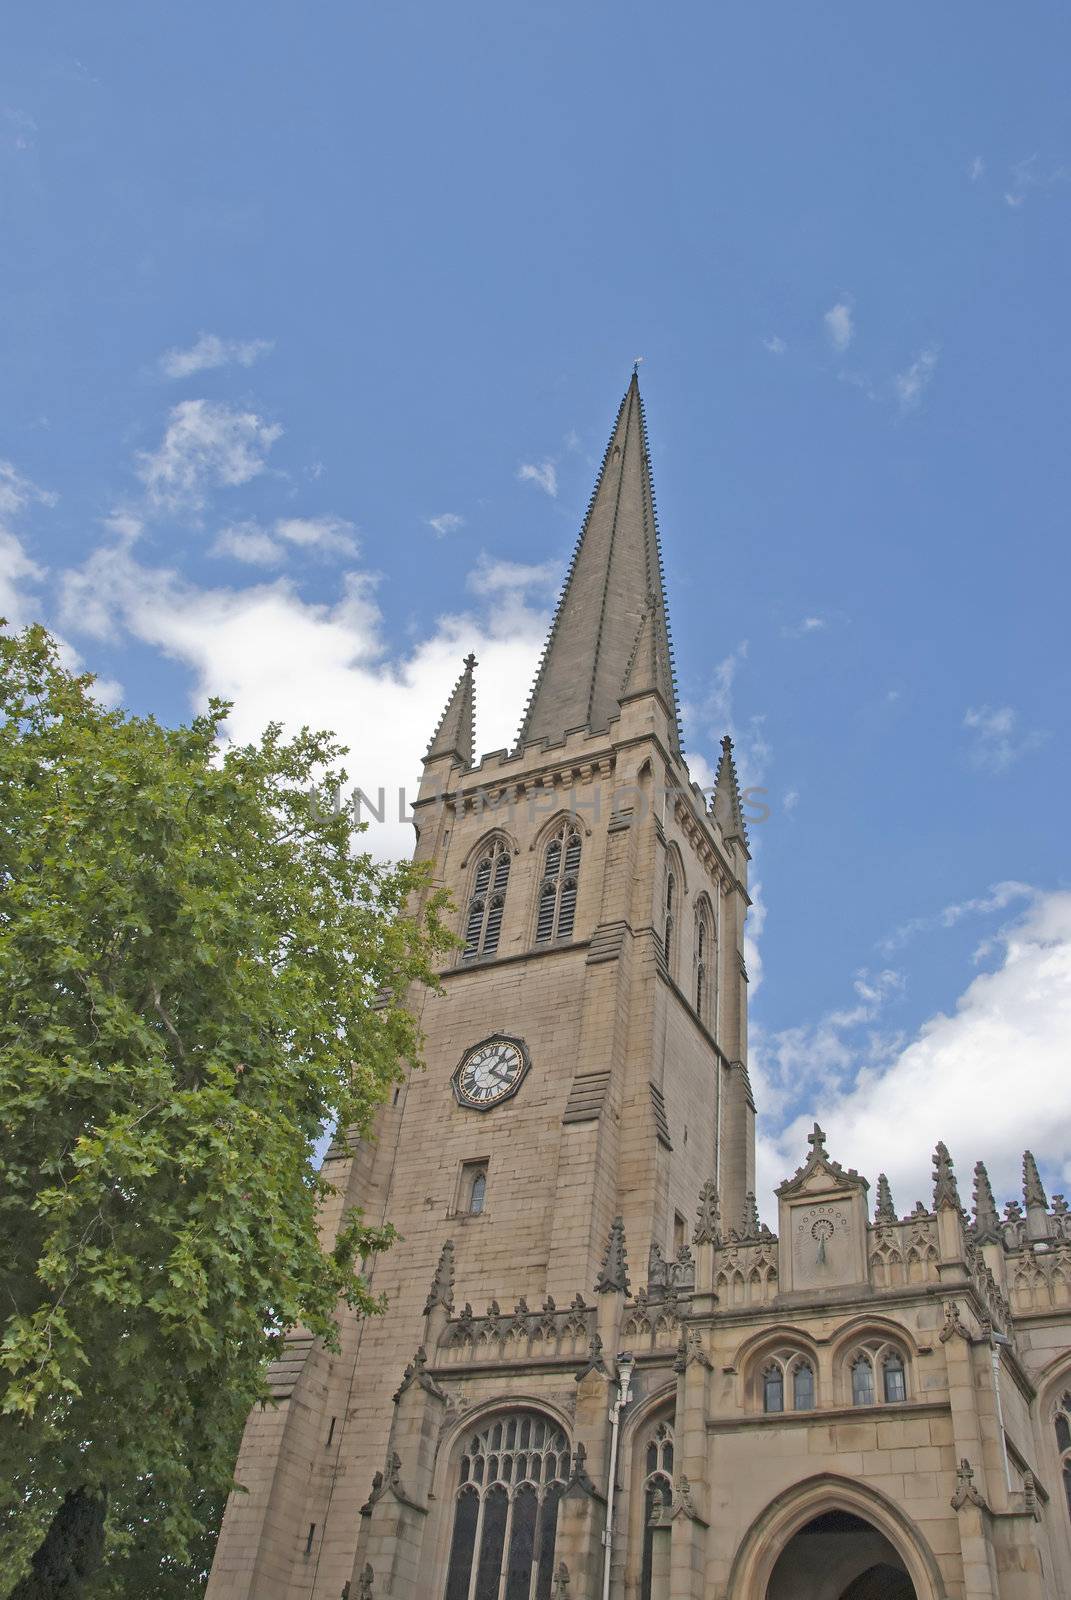 Portrait View of the Spire of the Fifteenth Century Cathedral of Wakefield Yorkshire